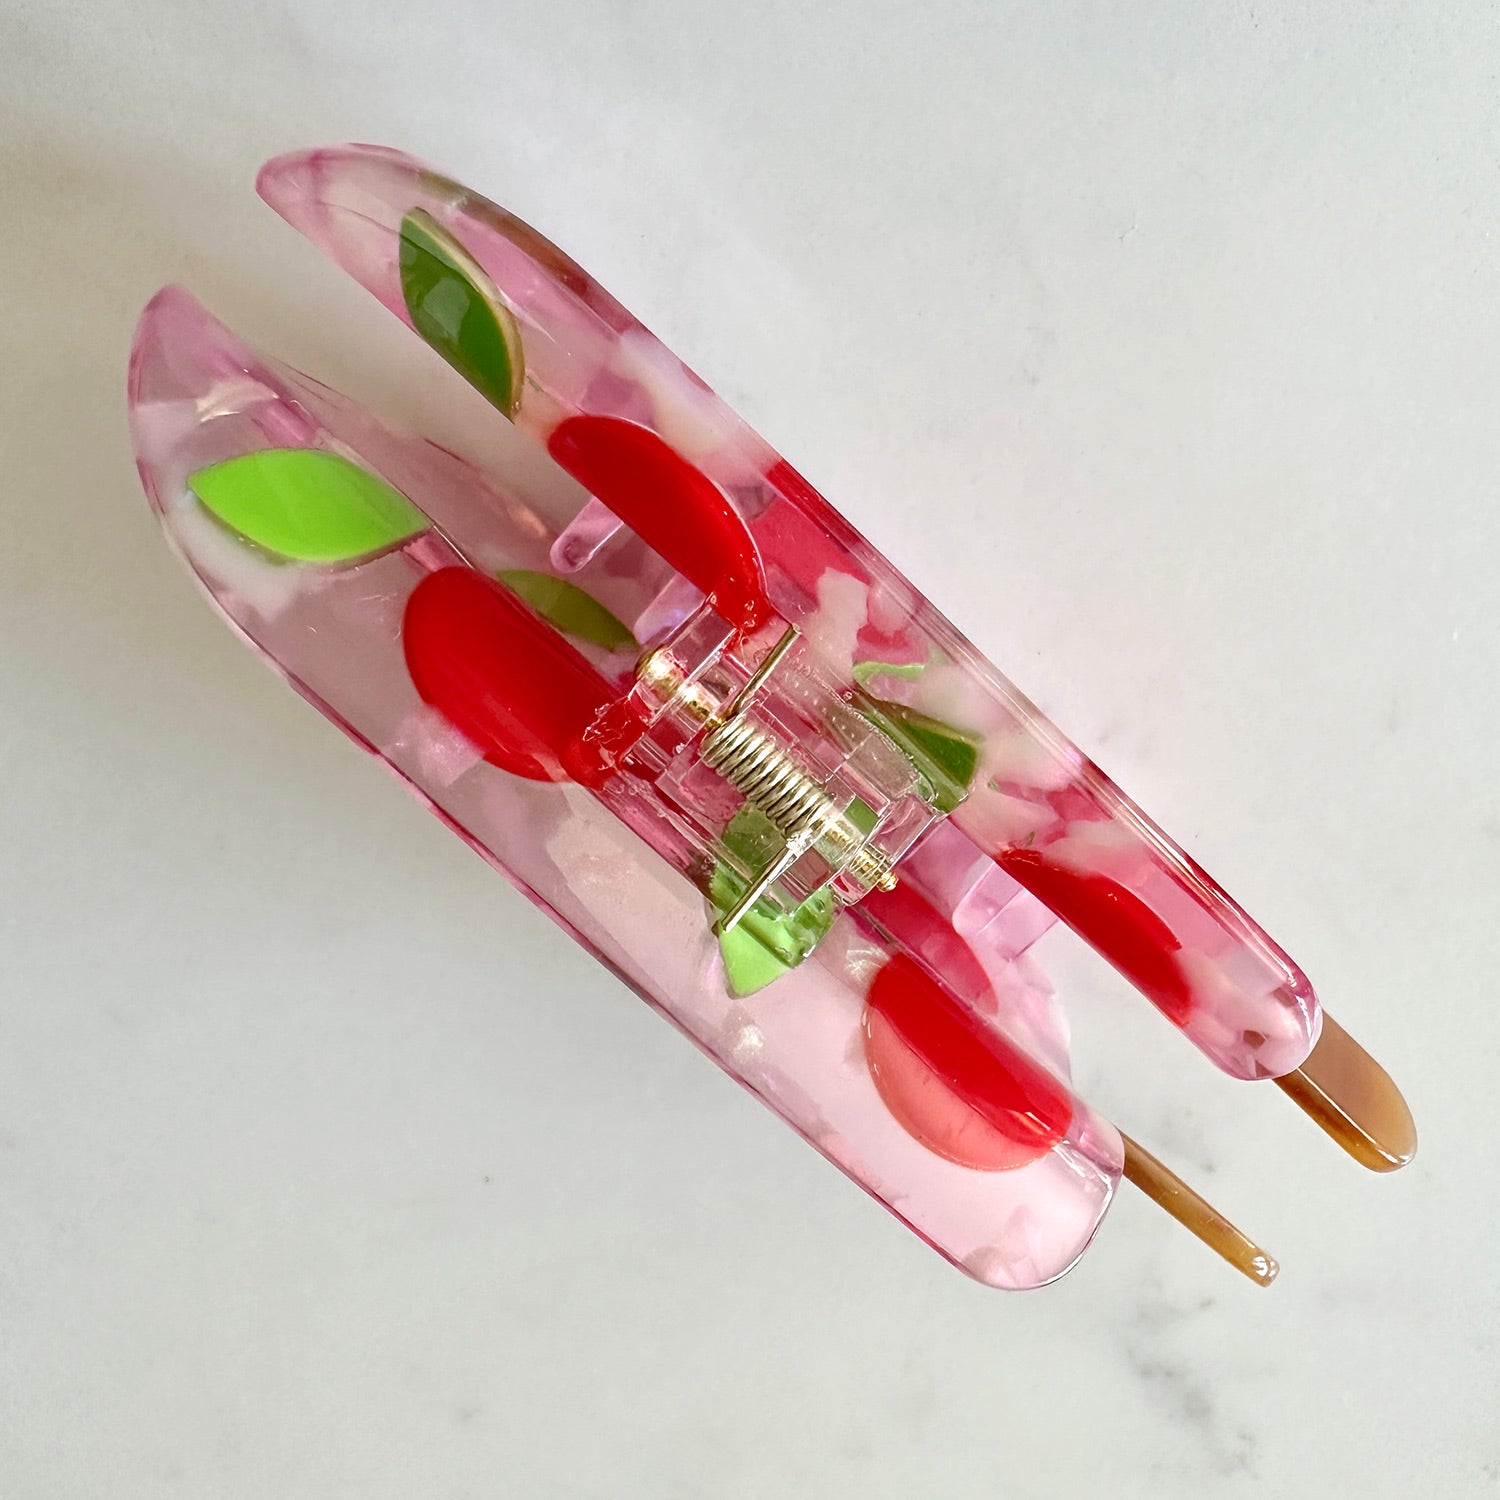 Keep it cool with our Cherry popsicle hair claw, with red cherries with crystals and pink translucent cellulose acetate